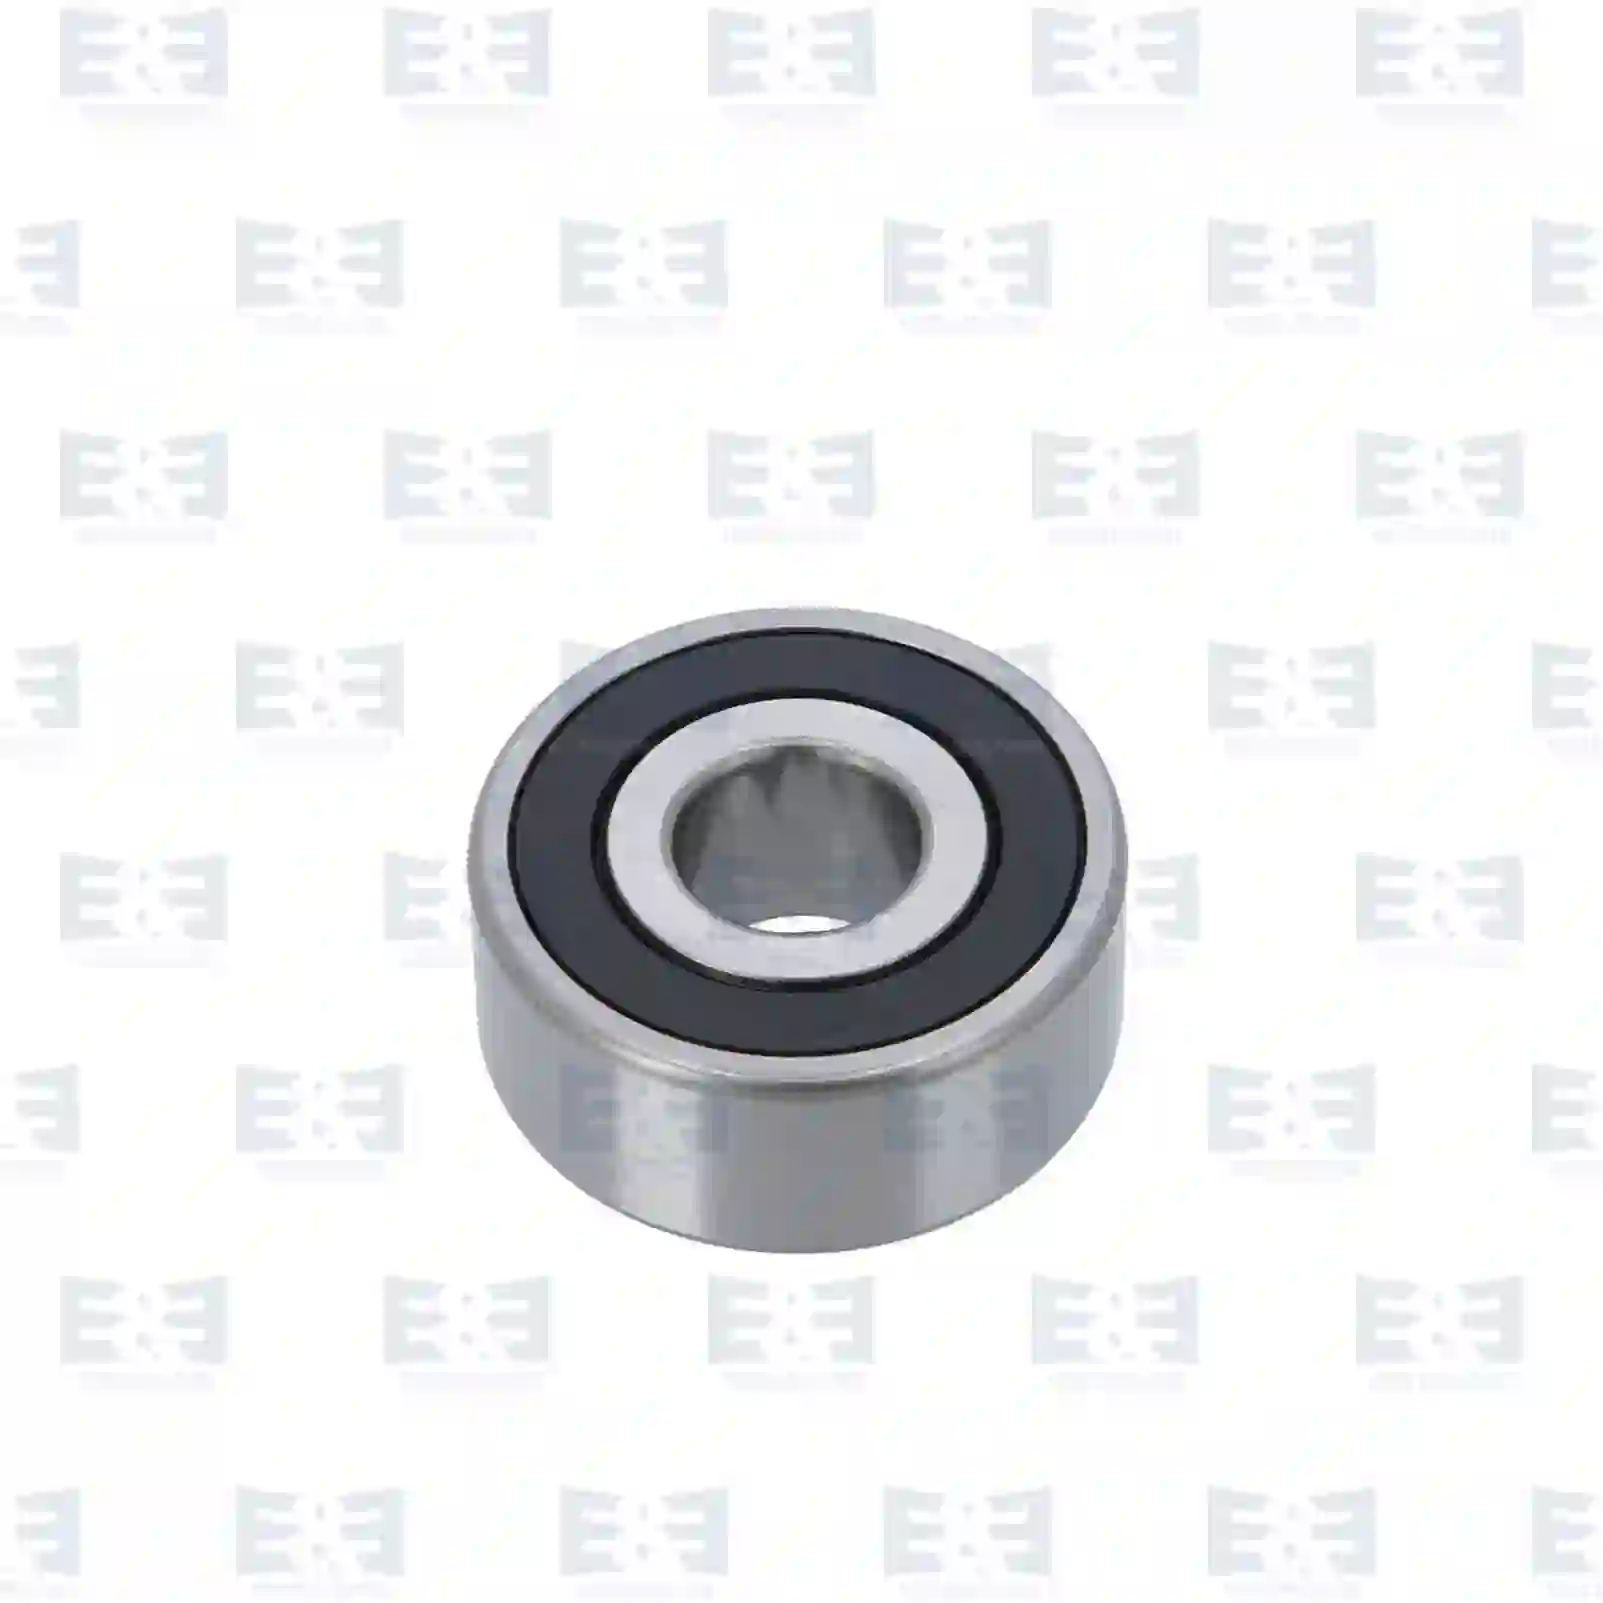 Bearings Ball bearing, EE No 2E2286121 ,  oem no:393932, ZG40187-0008, , E&E Truck Spare Parts | Truck Spare Parts, Auotomotive Spare Parts